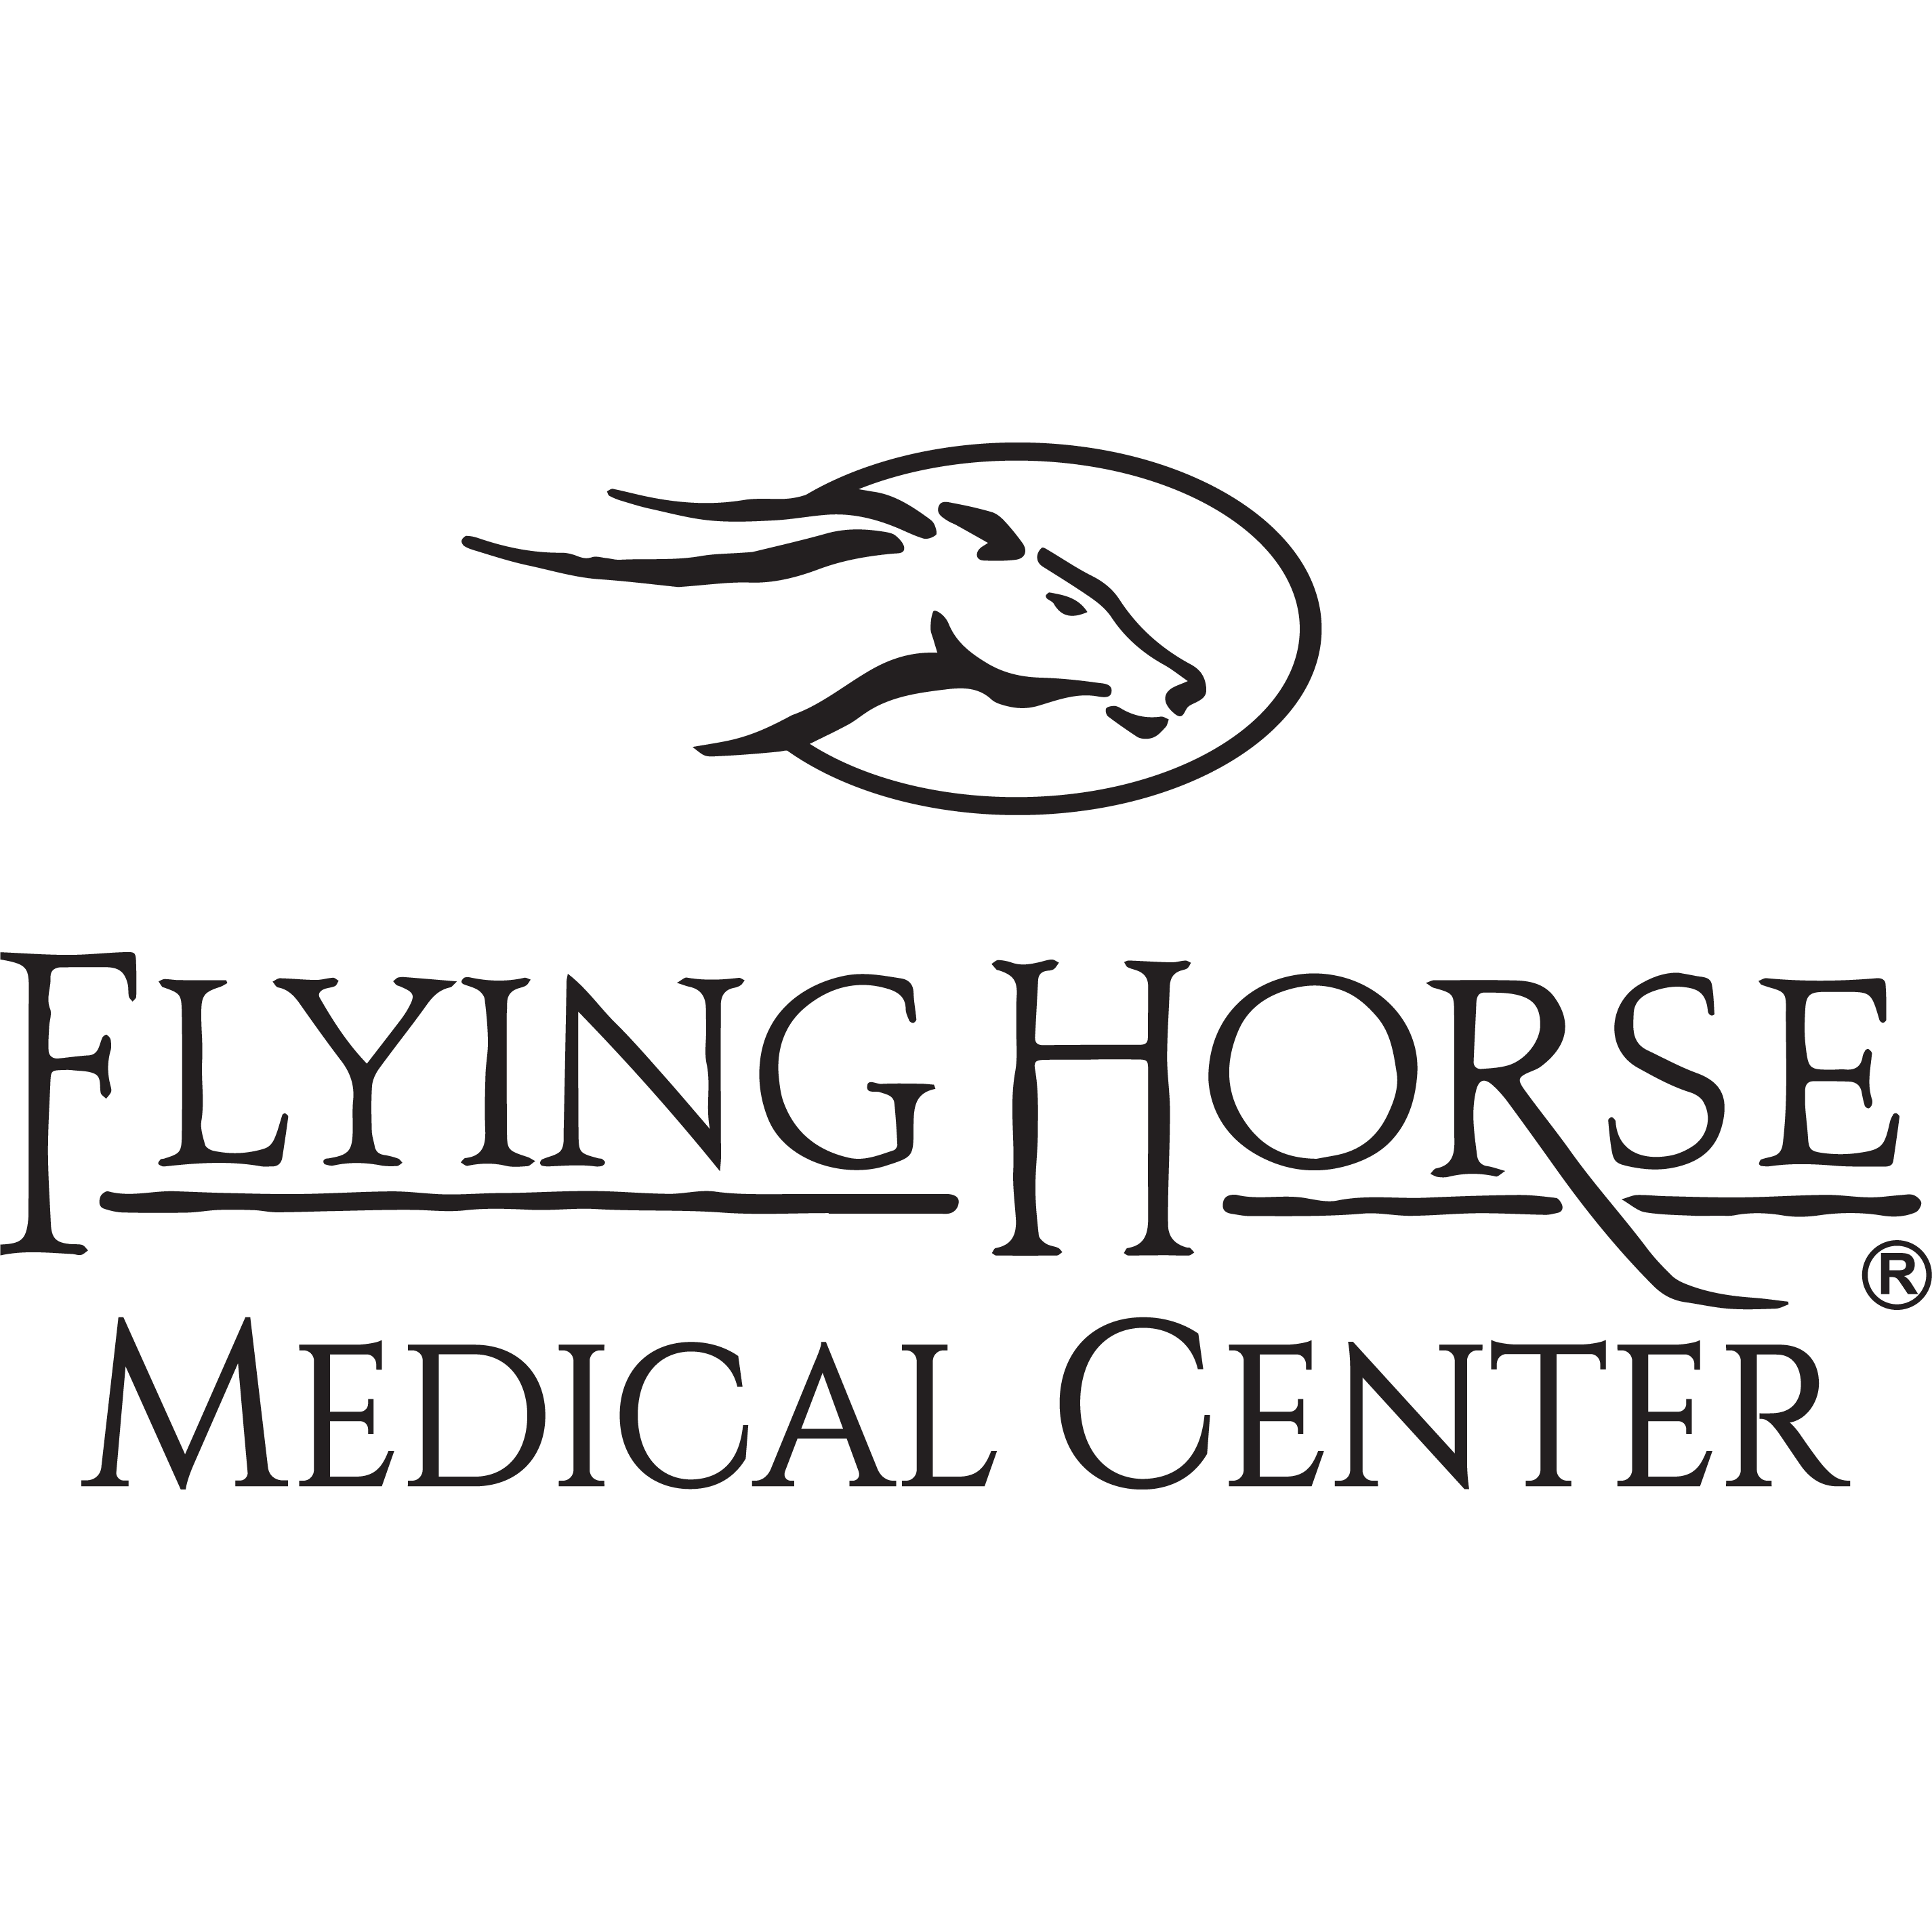 Flying Horse Medical Center - Monument, CO 80132 - (719)633-5255 | ShowMeLocal.com